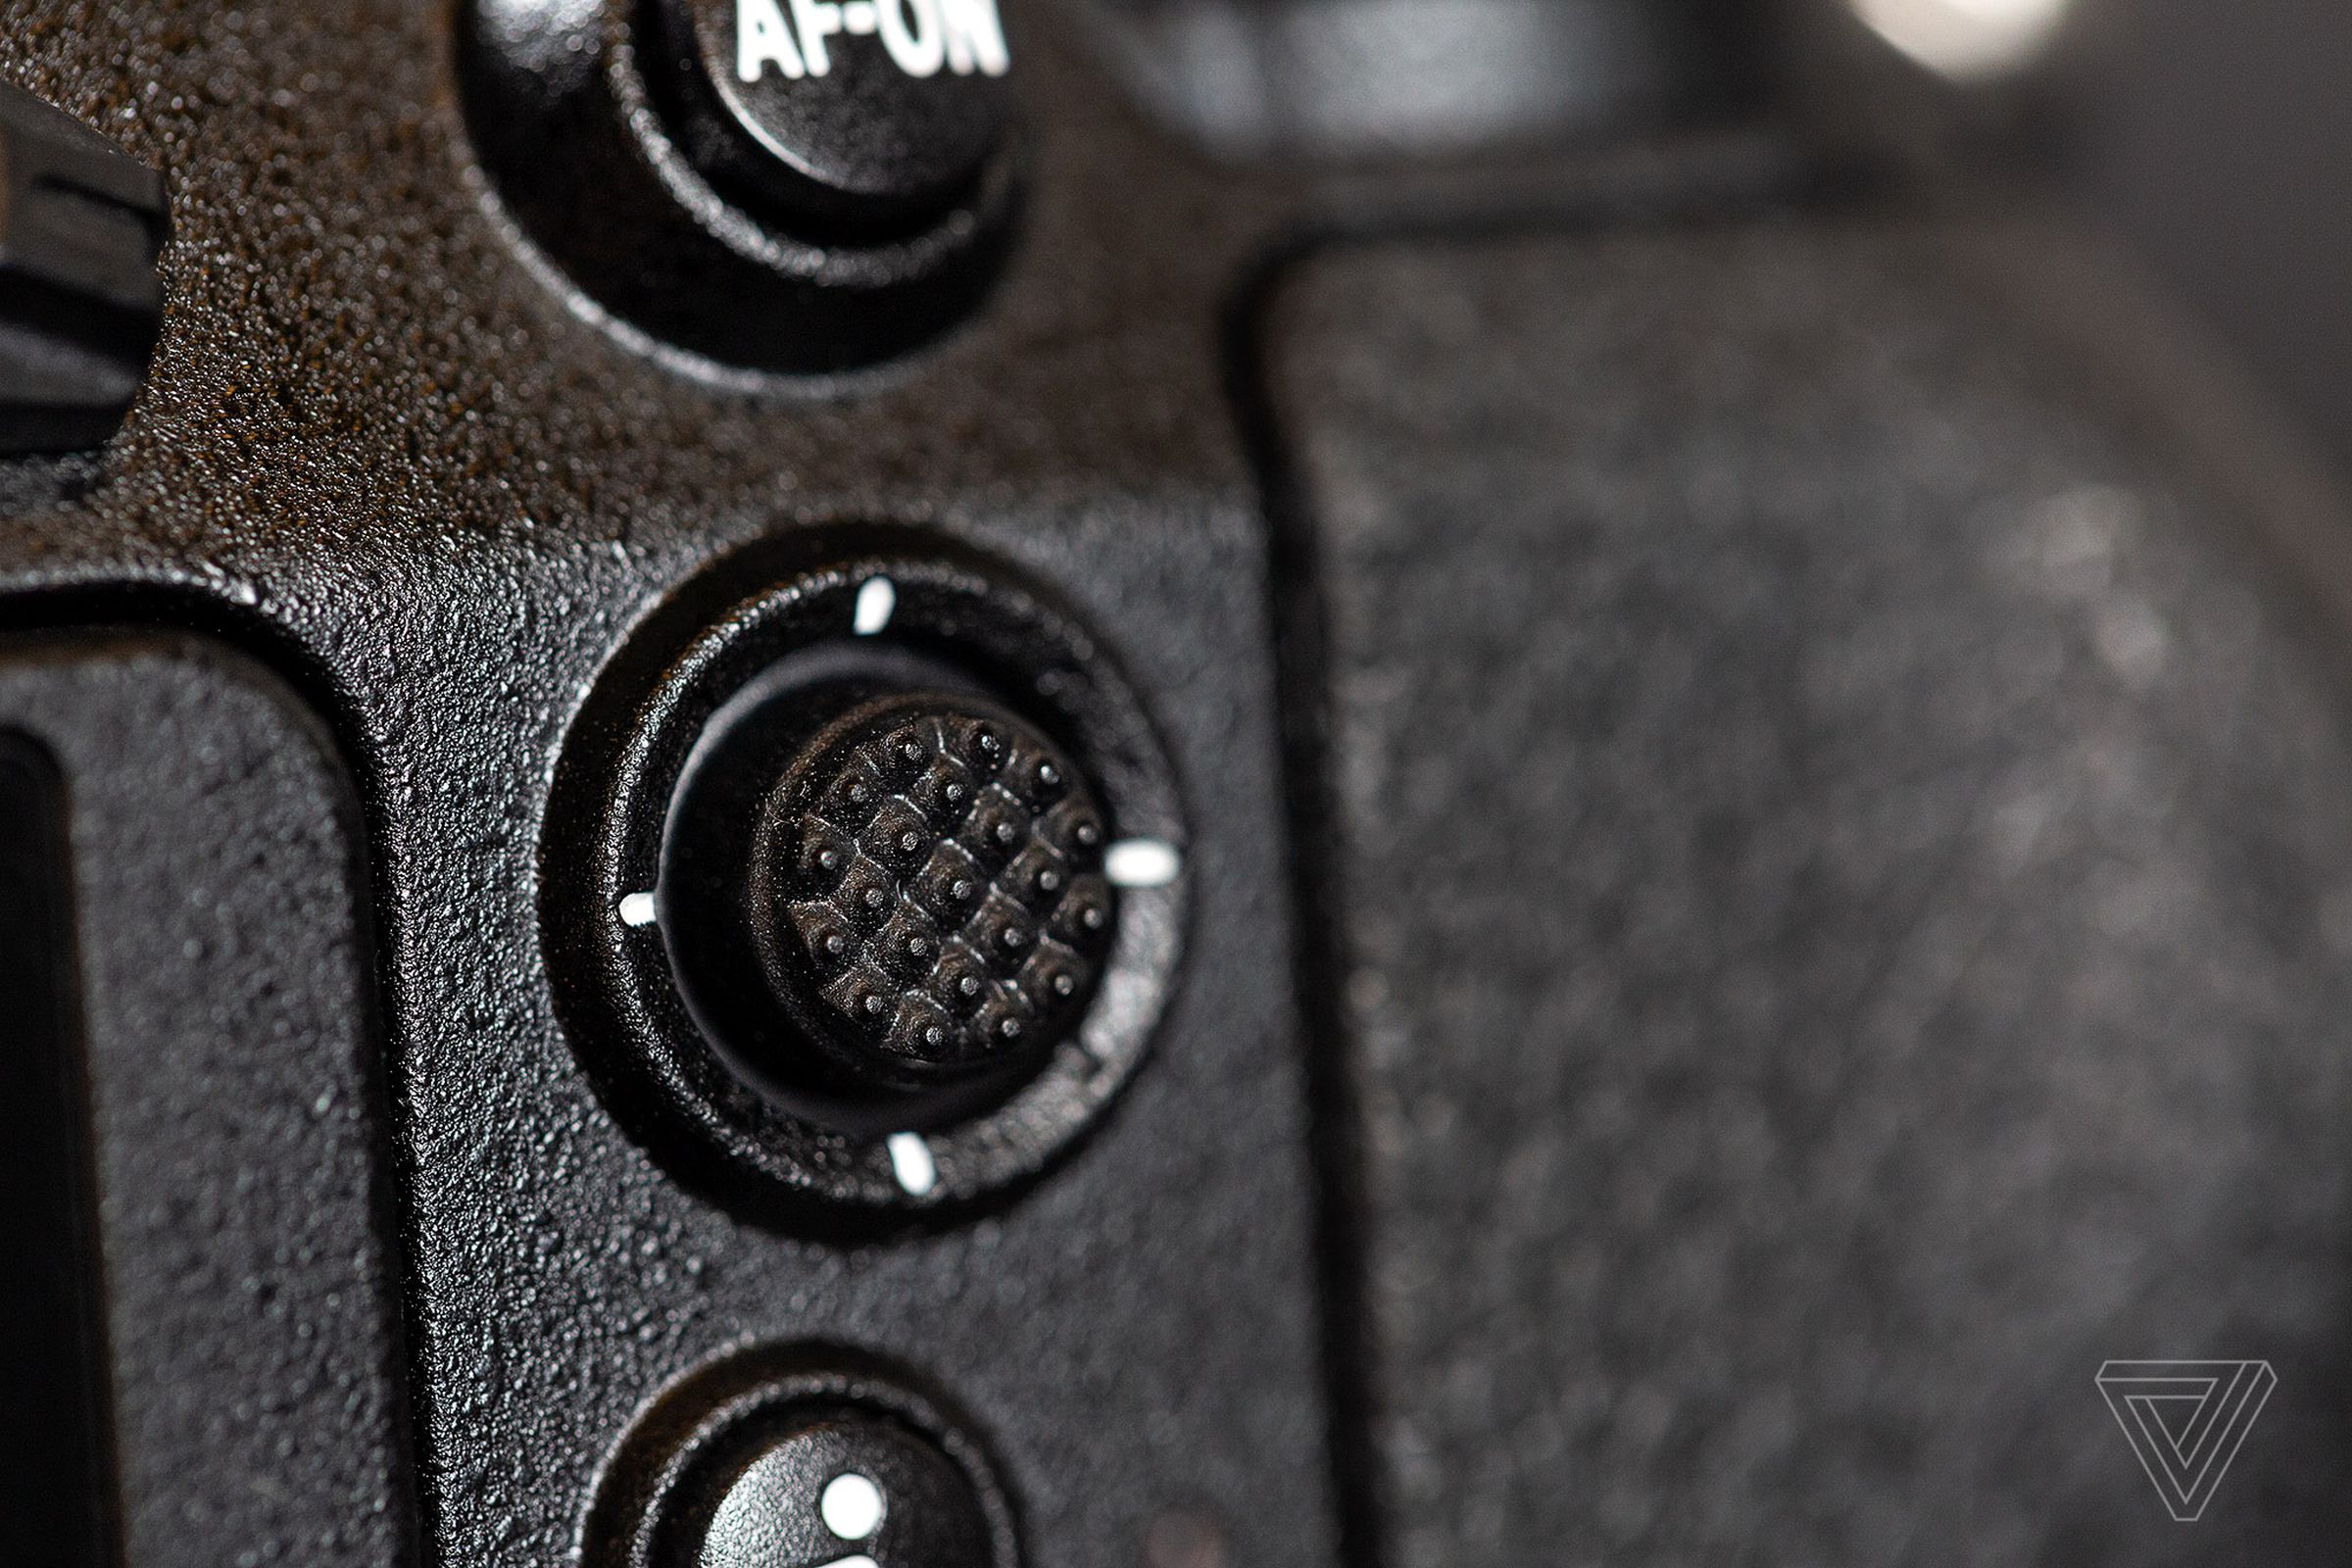 Nikon’s Z cameras have a traditional thumbstick for selecting your focus point.